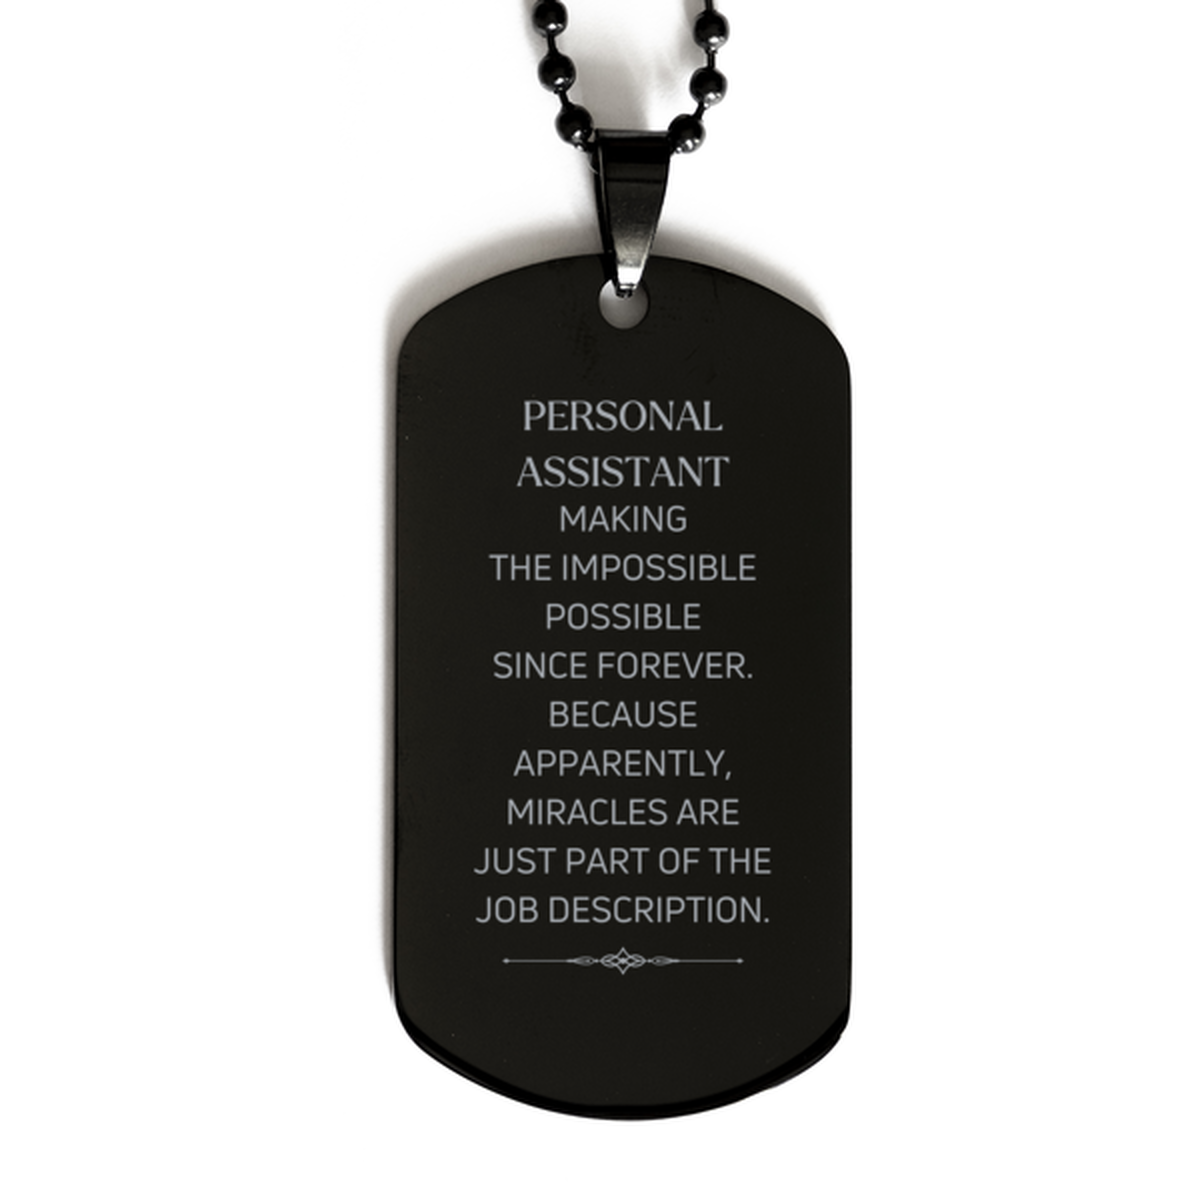 Funny Personal Assistant Gifts, Miracles are just part of the job description, Inspirational Birthday Black Dog Tag For Personal Assistant, Men, Women, Coworkers, Friends, Boss